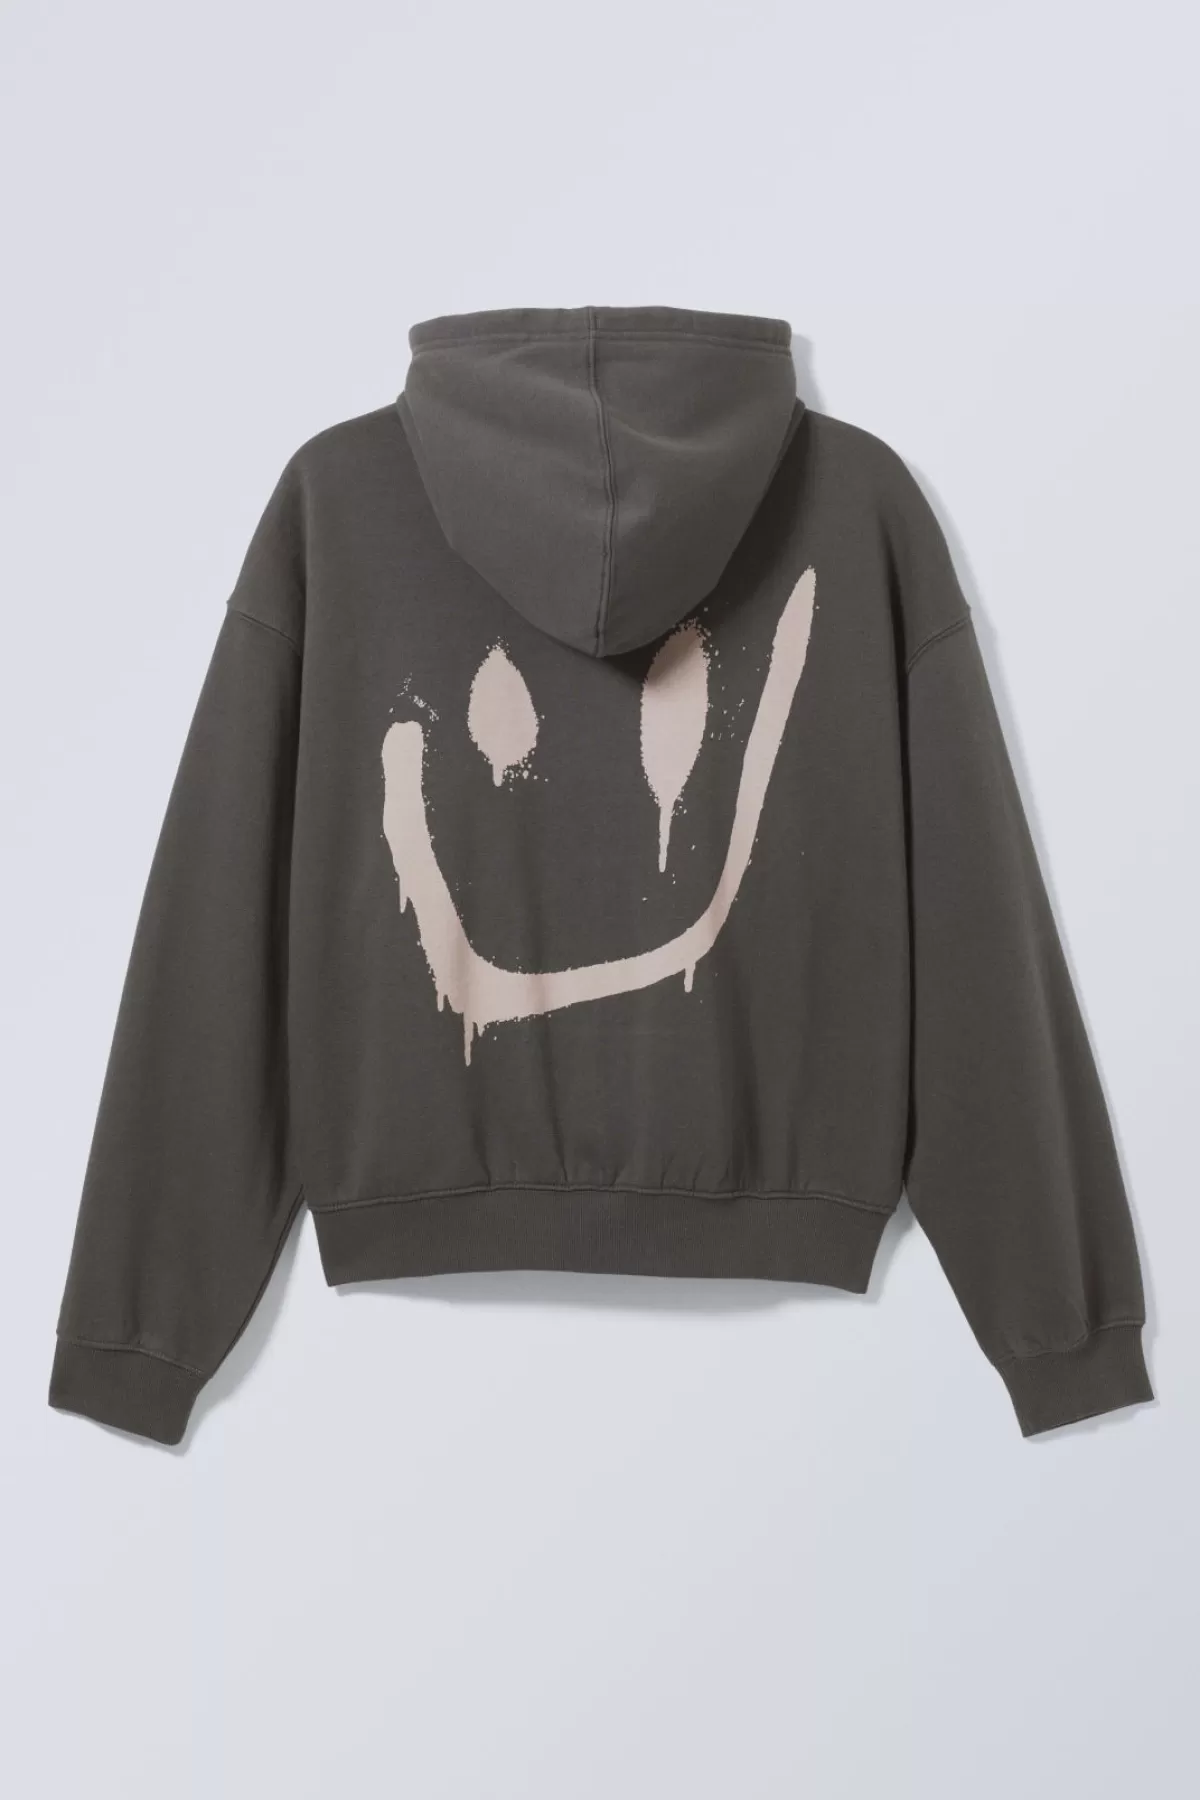 Weekday Boxy Graphic Zip Hoodie Drippy Smiling Face Shop